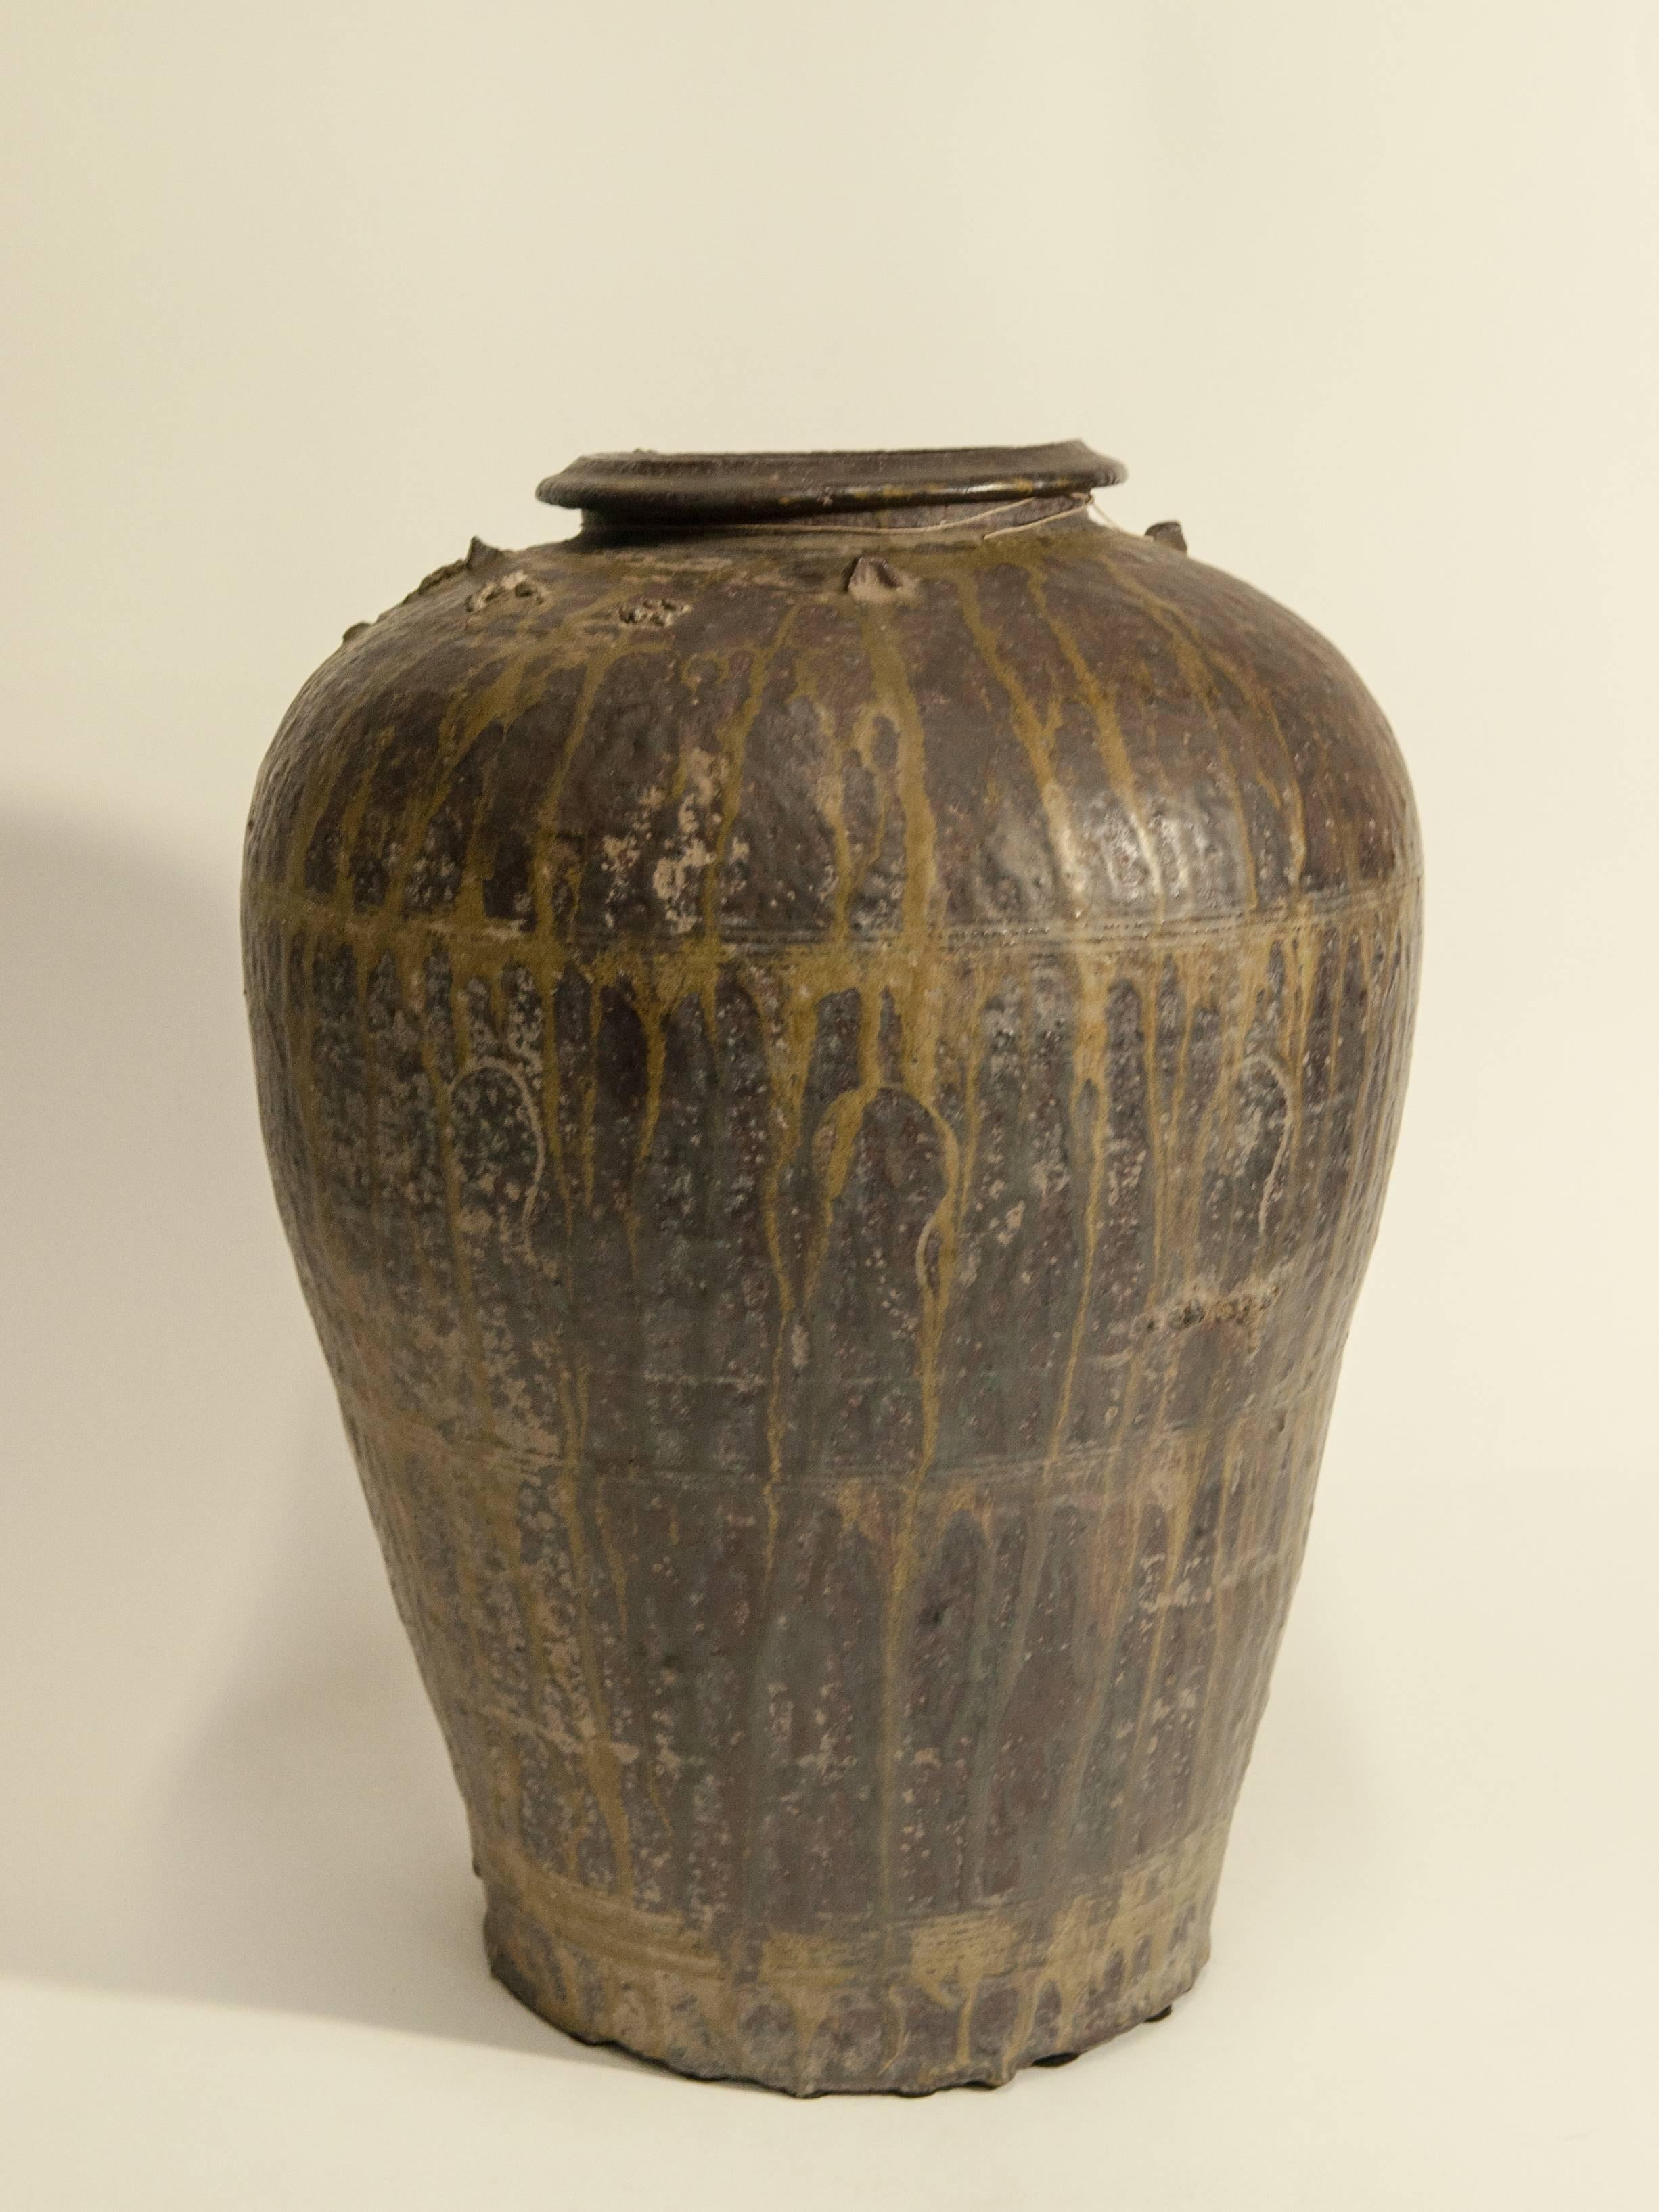 Martaban ware stoneware storage jar with drip glaze. Ming dynasty, found in Laos.
This storage jar, brown with a yellow drip glaze, was recovered in Laos, but most likely manufactured elsewhere -- in southern China during the Ming dynasty; or